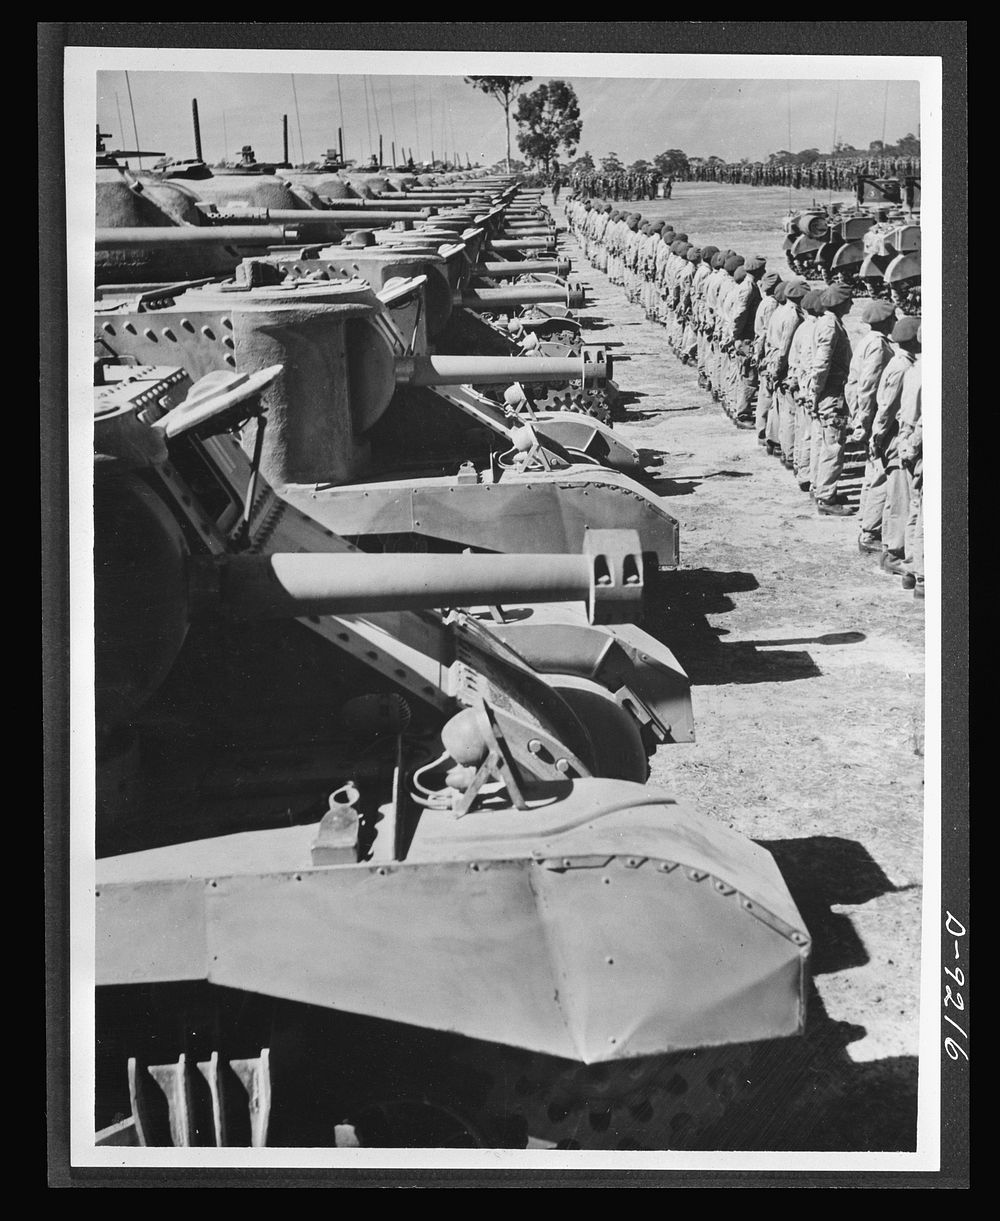 Australia in the war. An Australian armored division, equipped with American tanks, lined up for review at a camp somewhere…